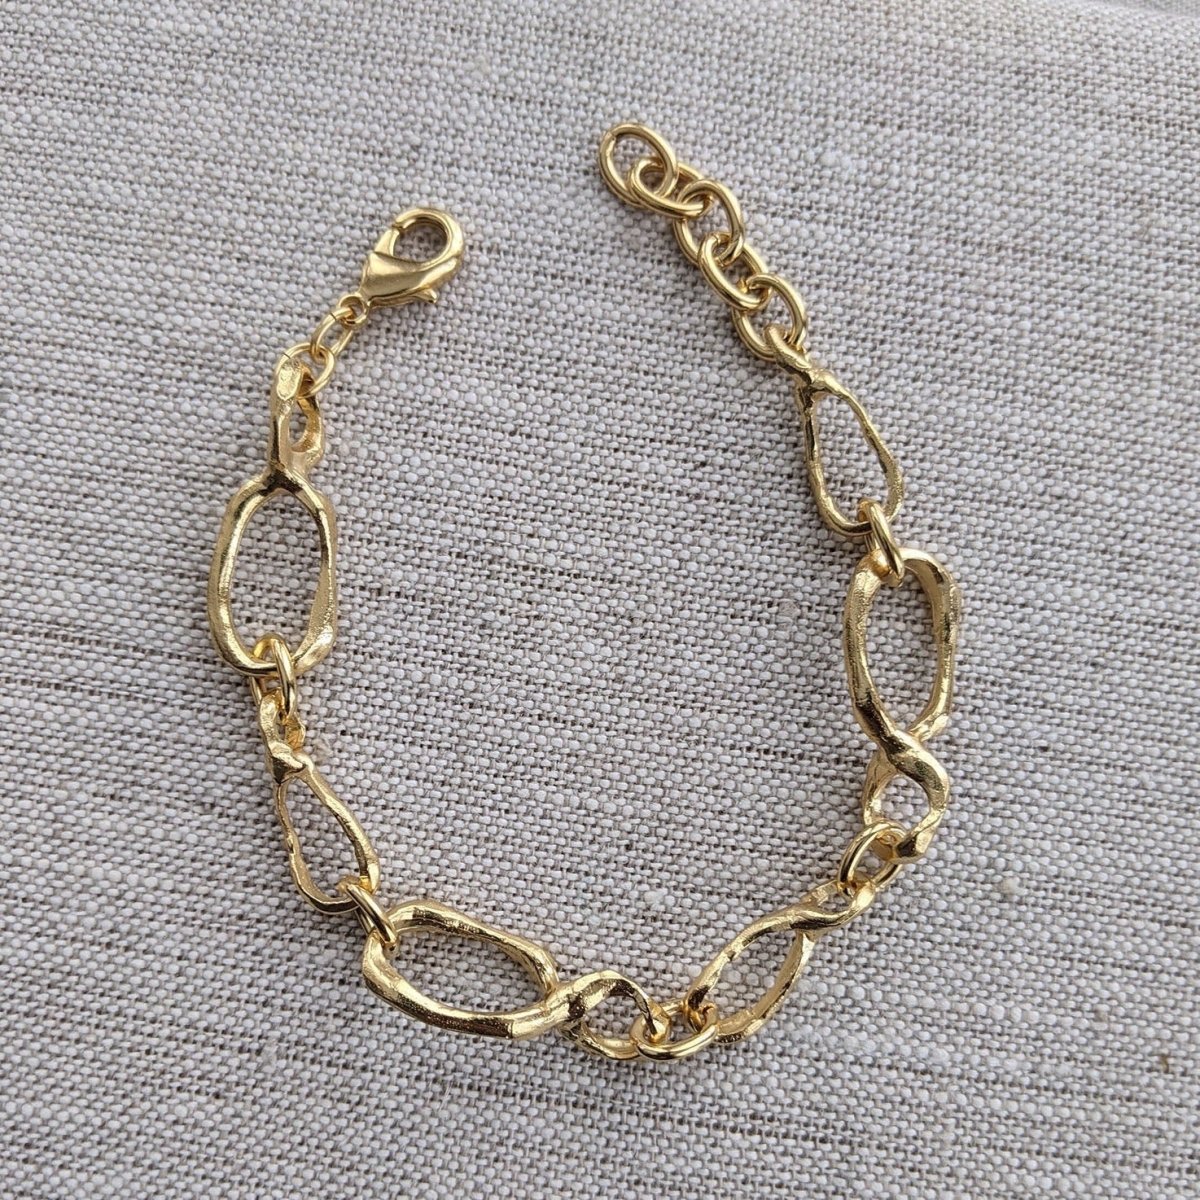 A linked 22 kt gold plated bracelet lays against a gray background. The Small Favors Link Sculptured Bracelet is designed by Lingua Nigra and handcrafted in Chicago, Illinois.